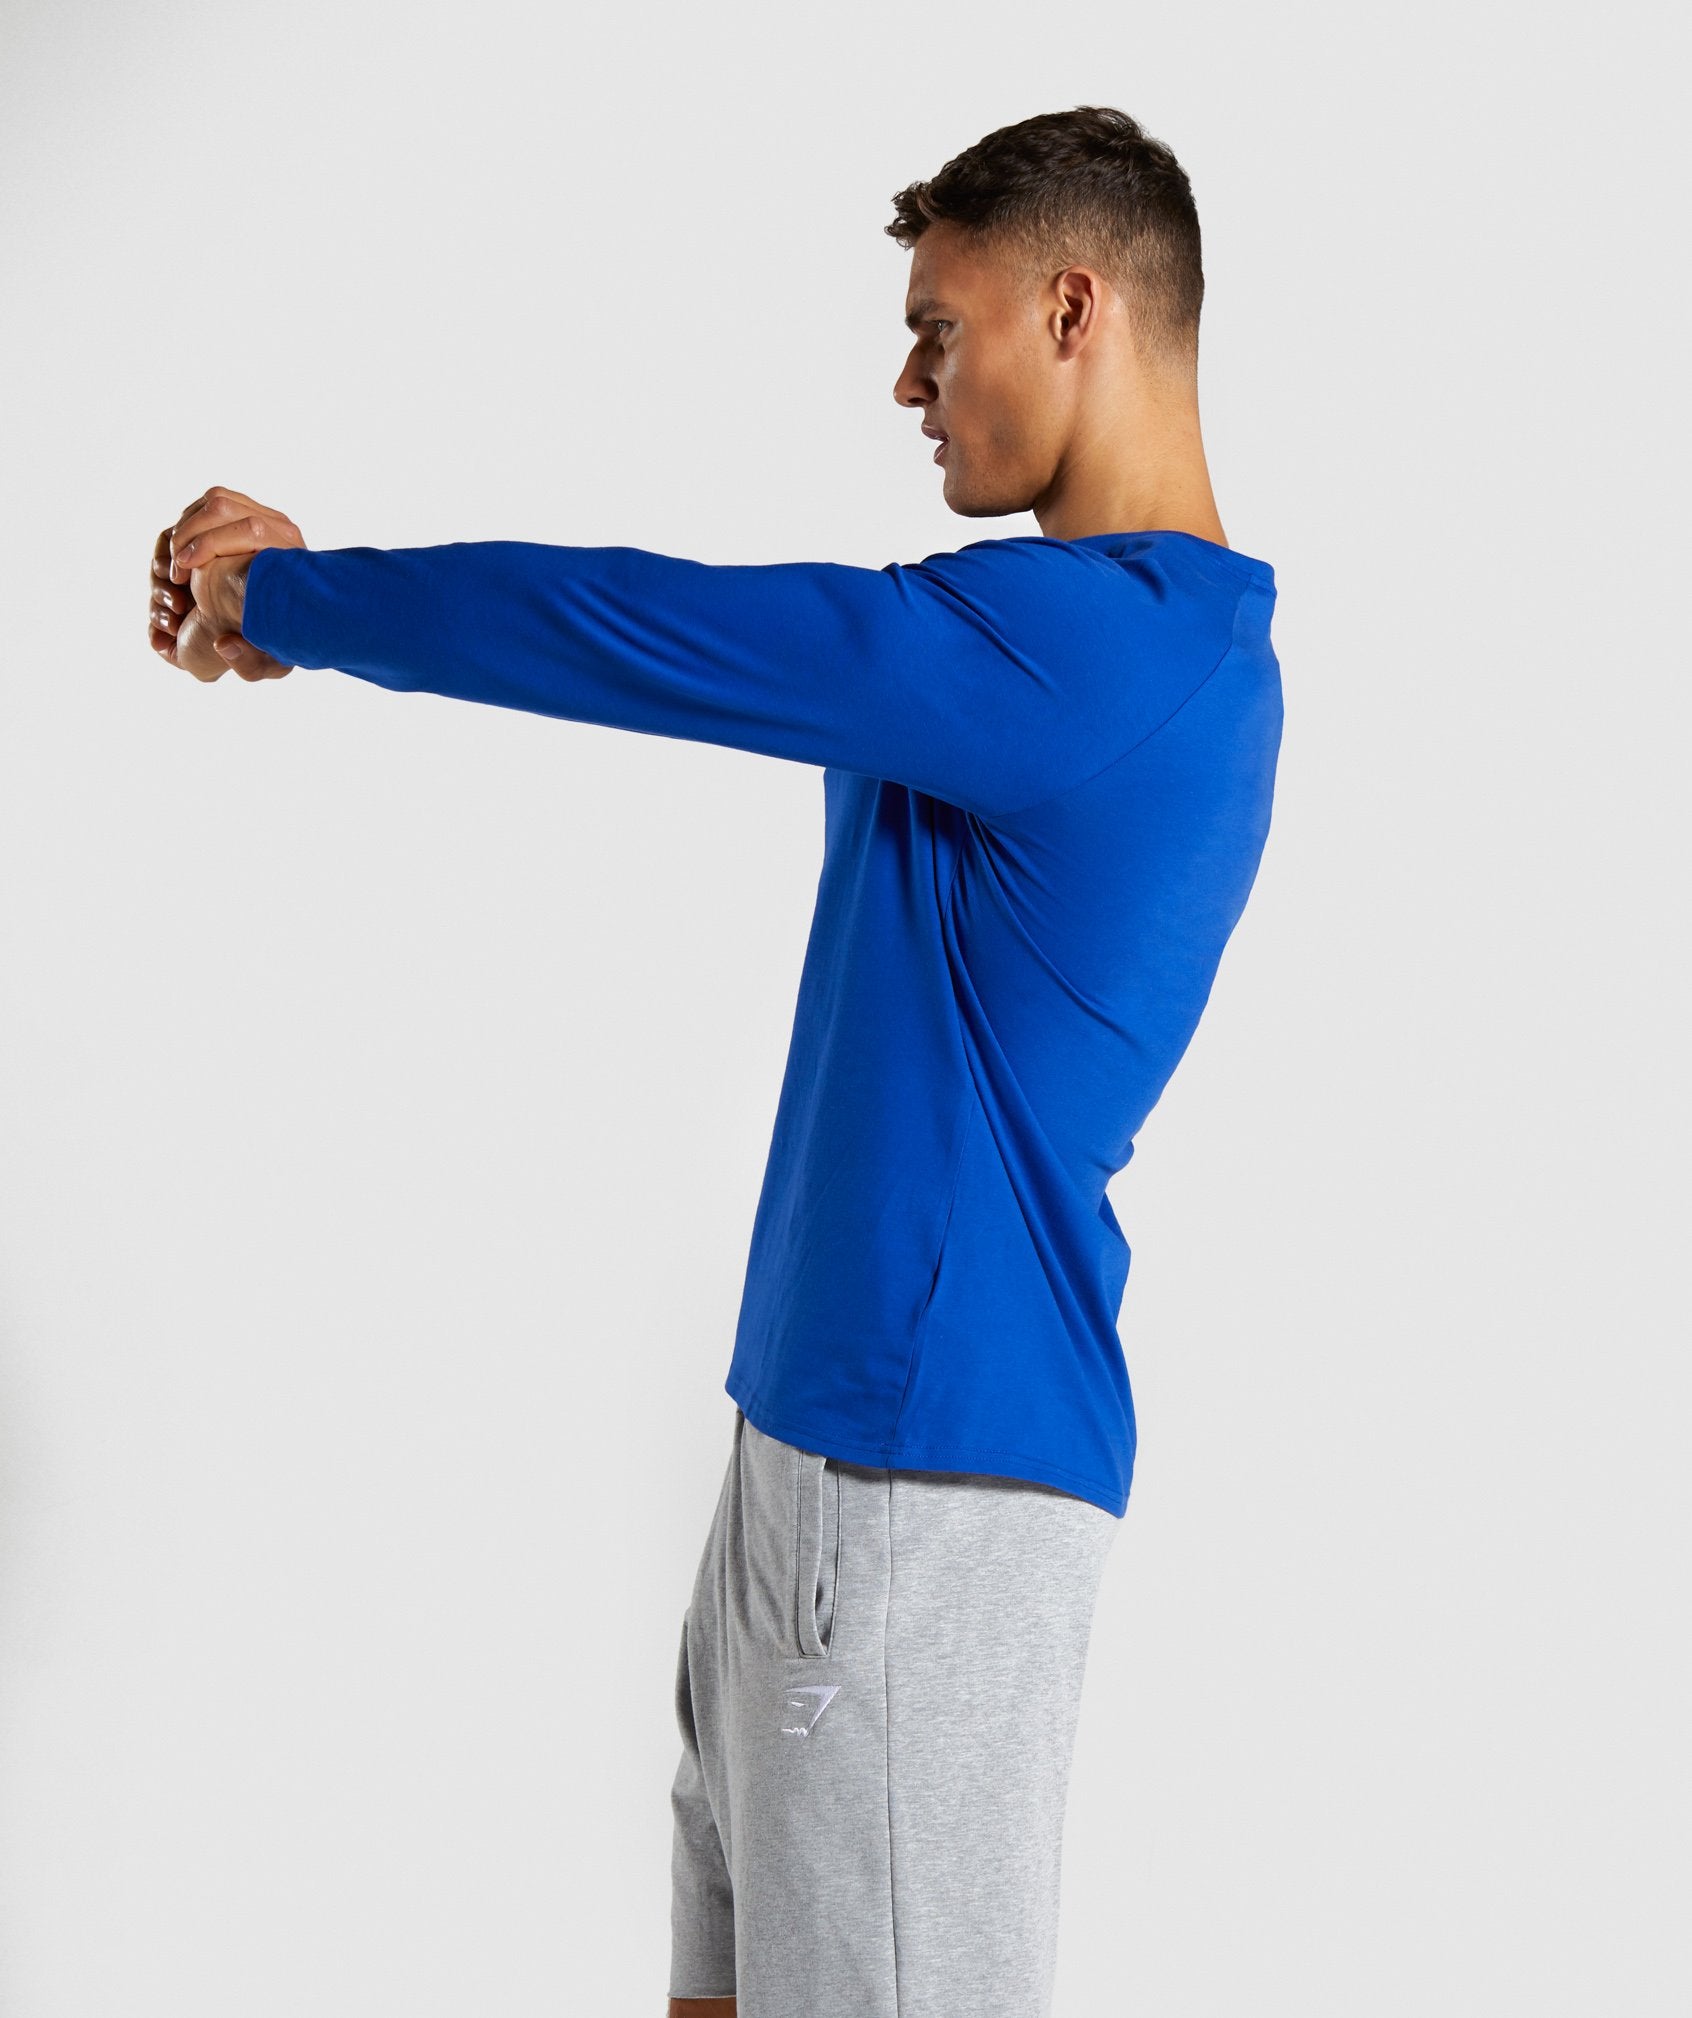 Apollo Long Sleeve T-Shirt in Blue - view 3